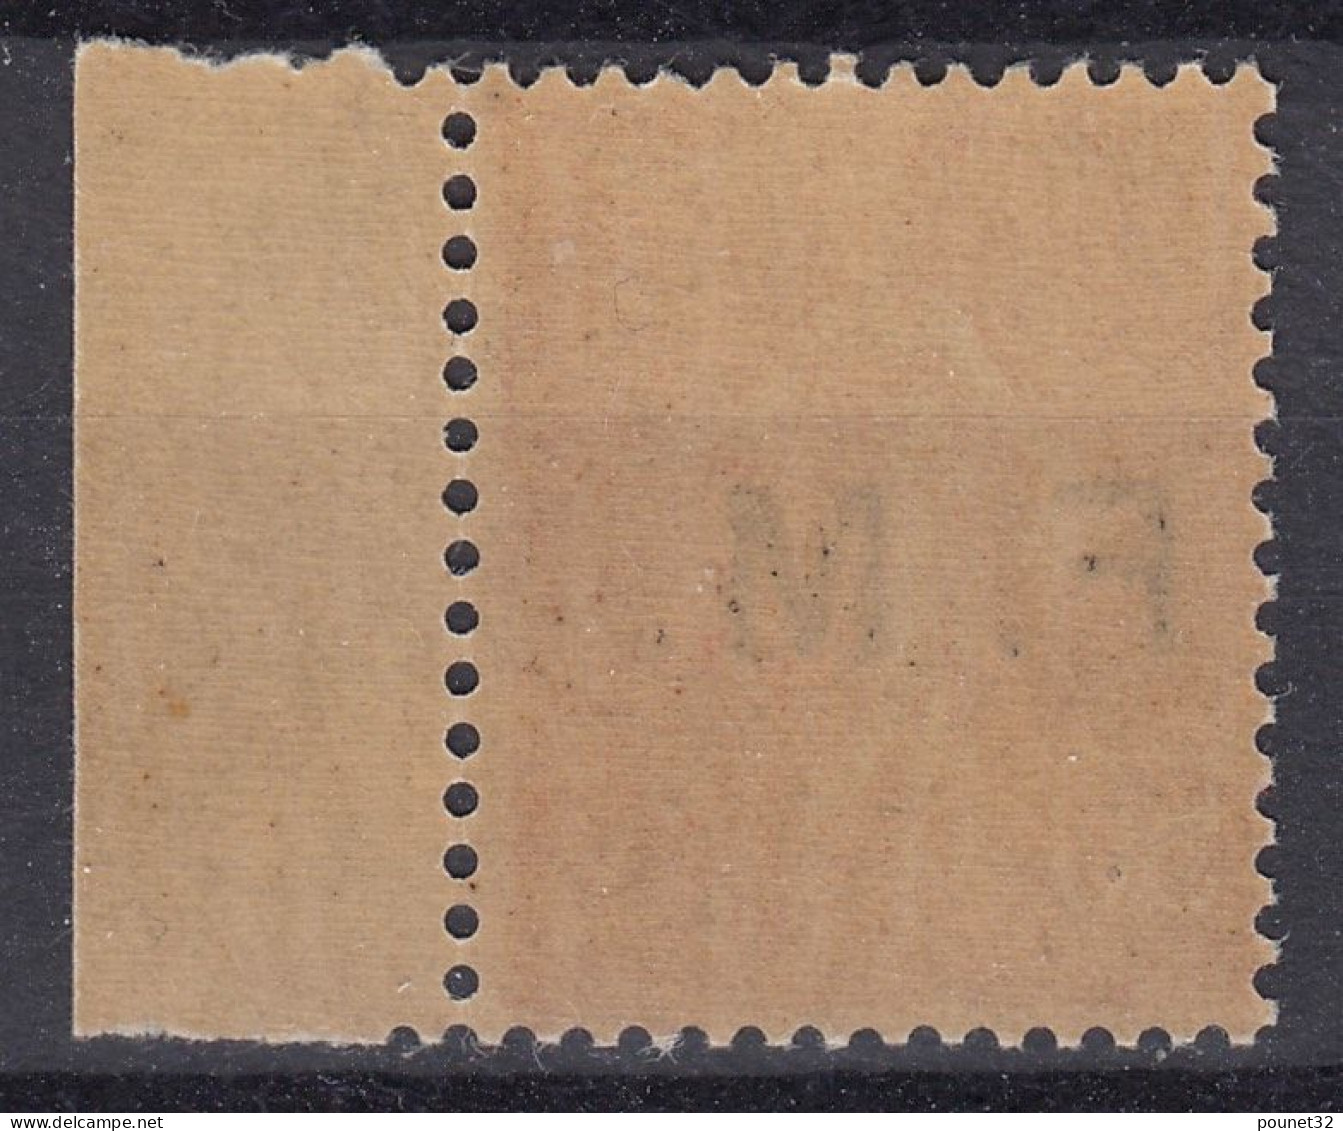 TIMBRE FRANCE SEMEUSE FM N° 6 NEUF ** GOMME SANS CHARNIERE BORD DE FEUILLE - Military Postage Stamps